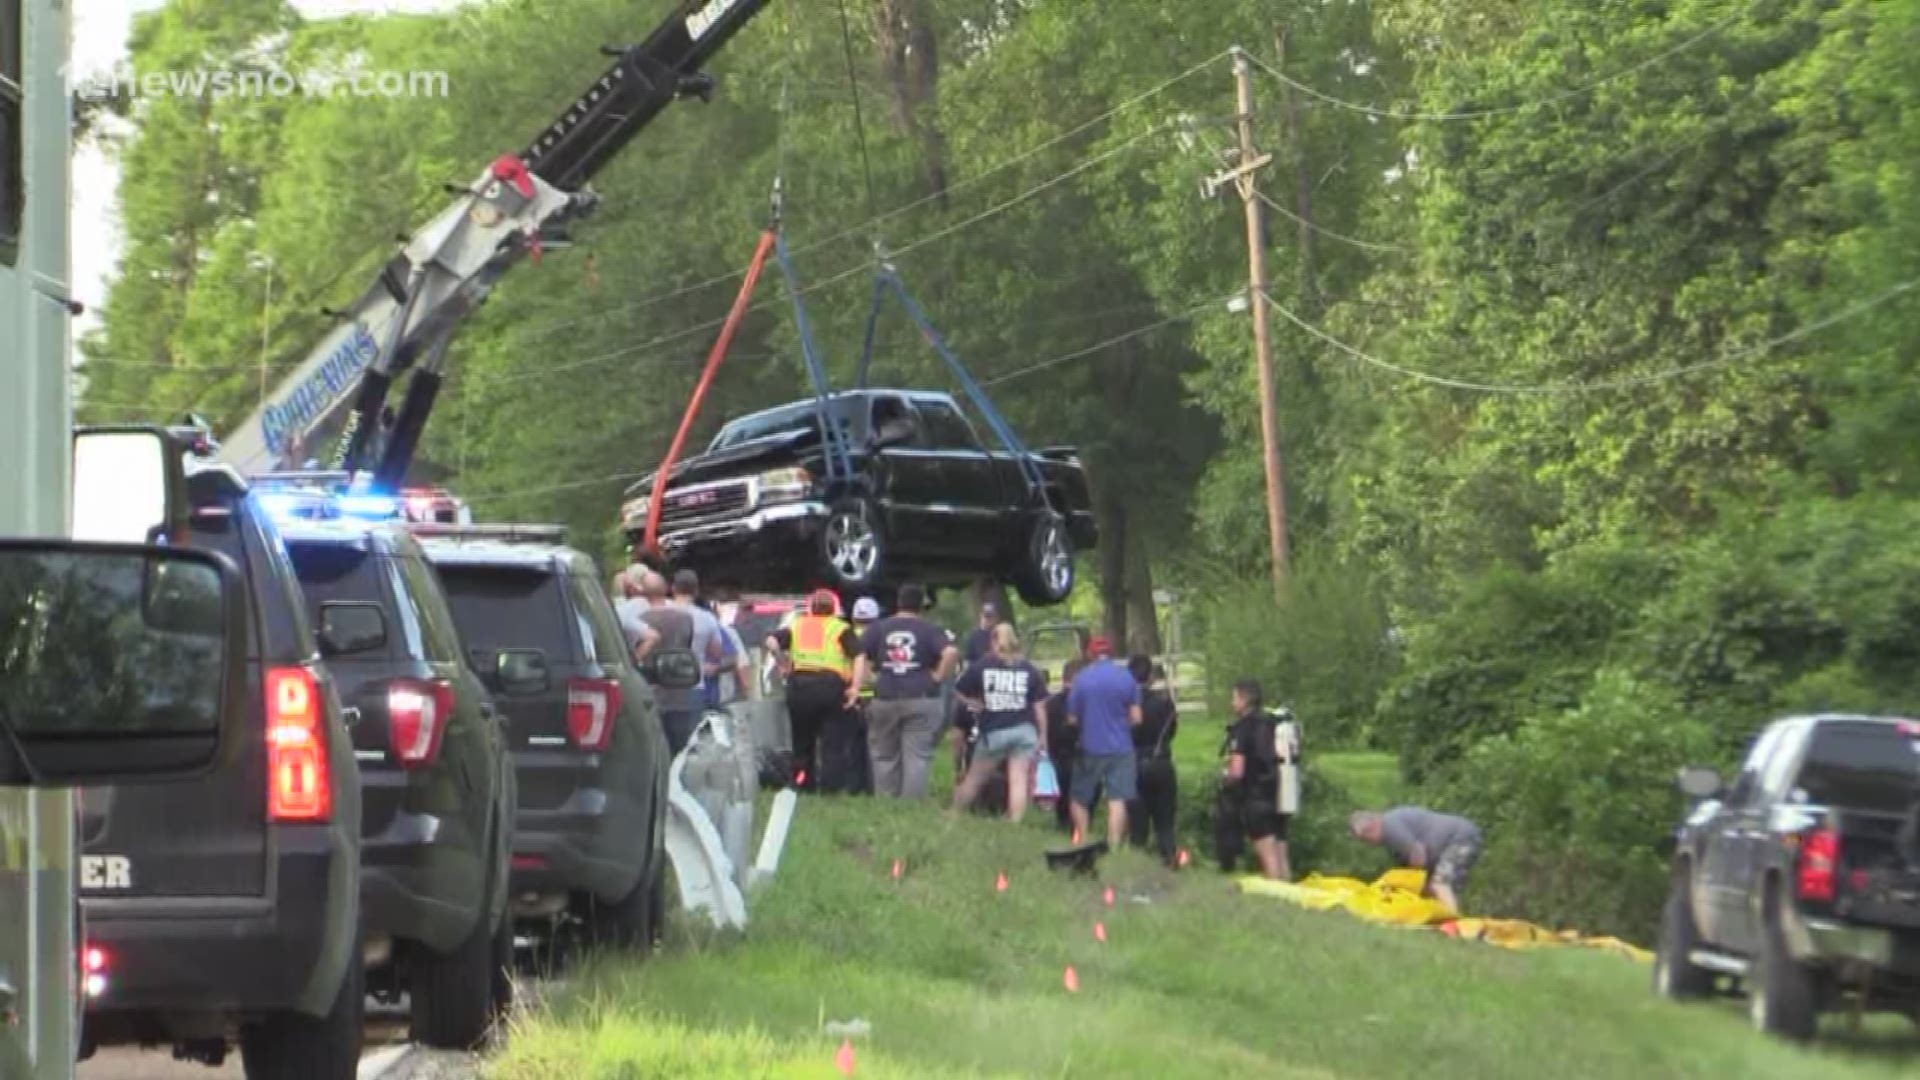 Investigators believe the truck may have gone off the road early Saturday morning